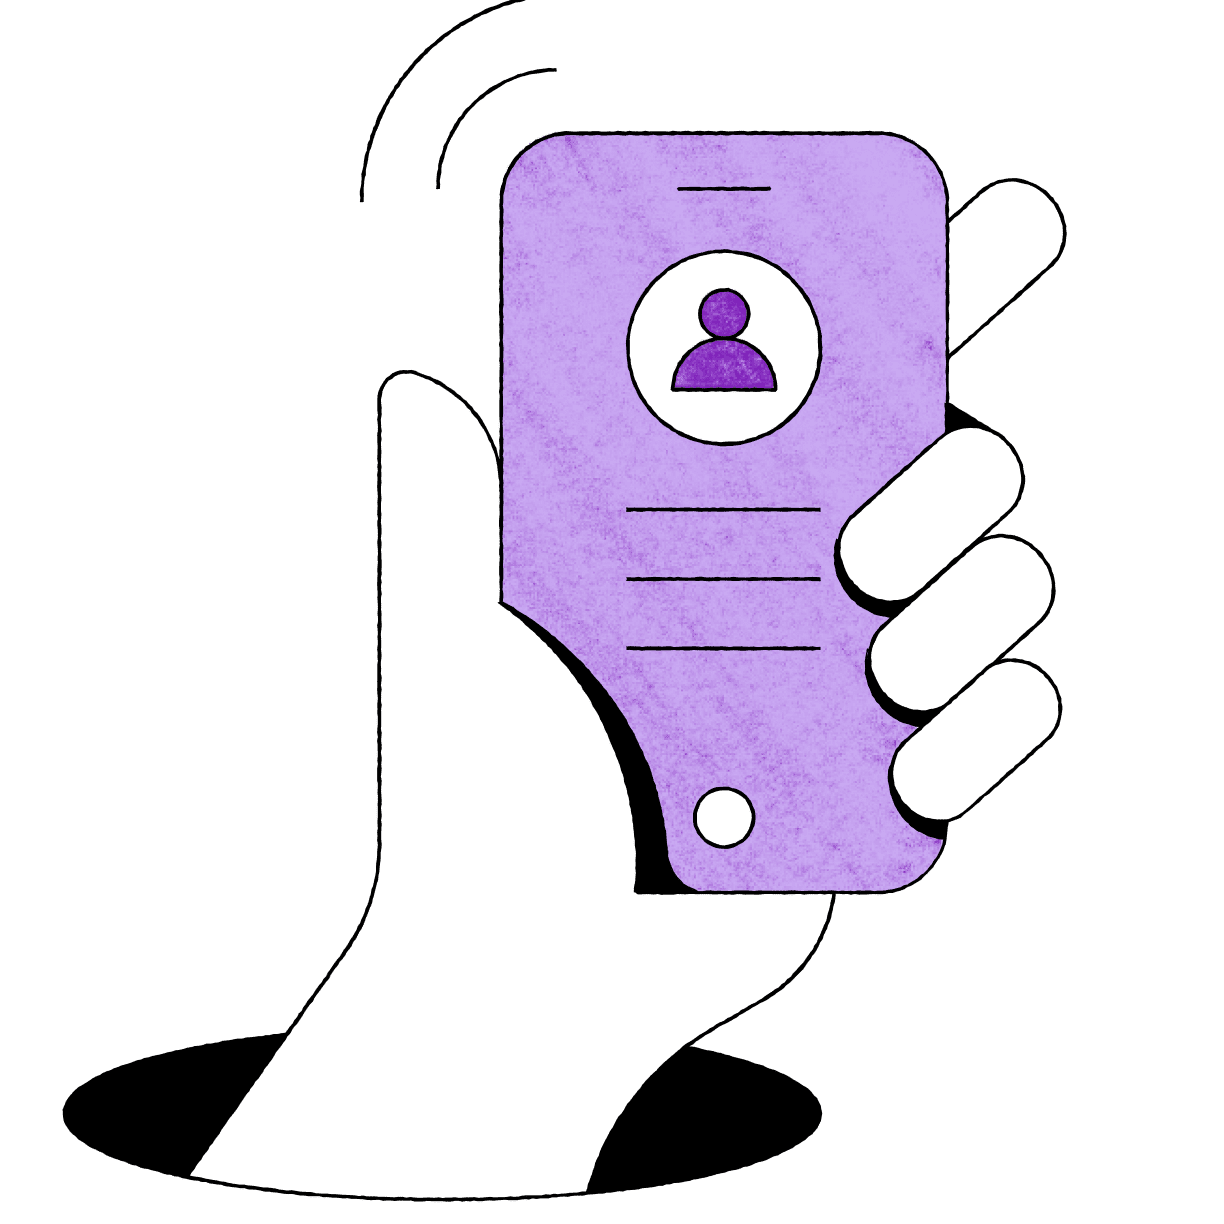 Illustration of a hand reaching up & holding a cellphone.